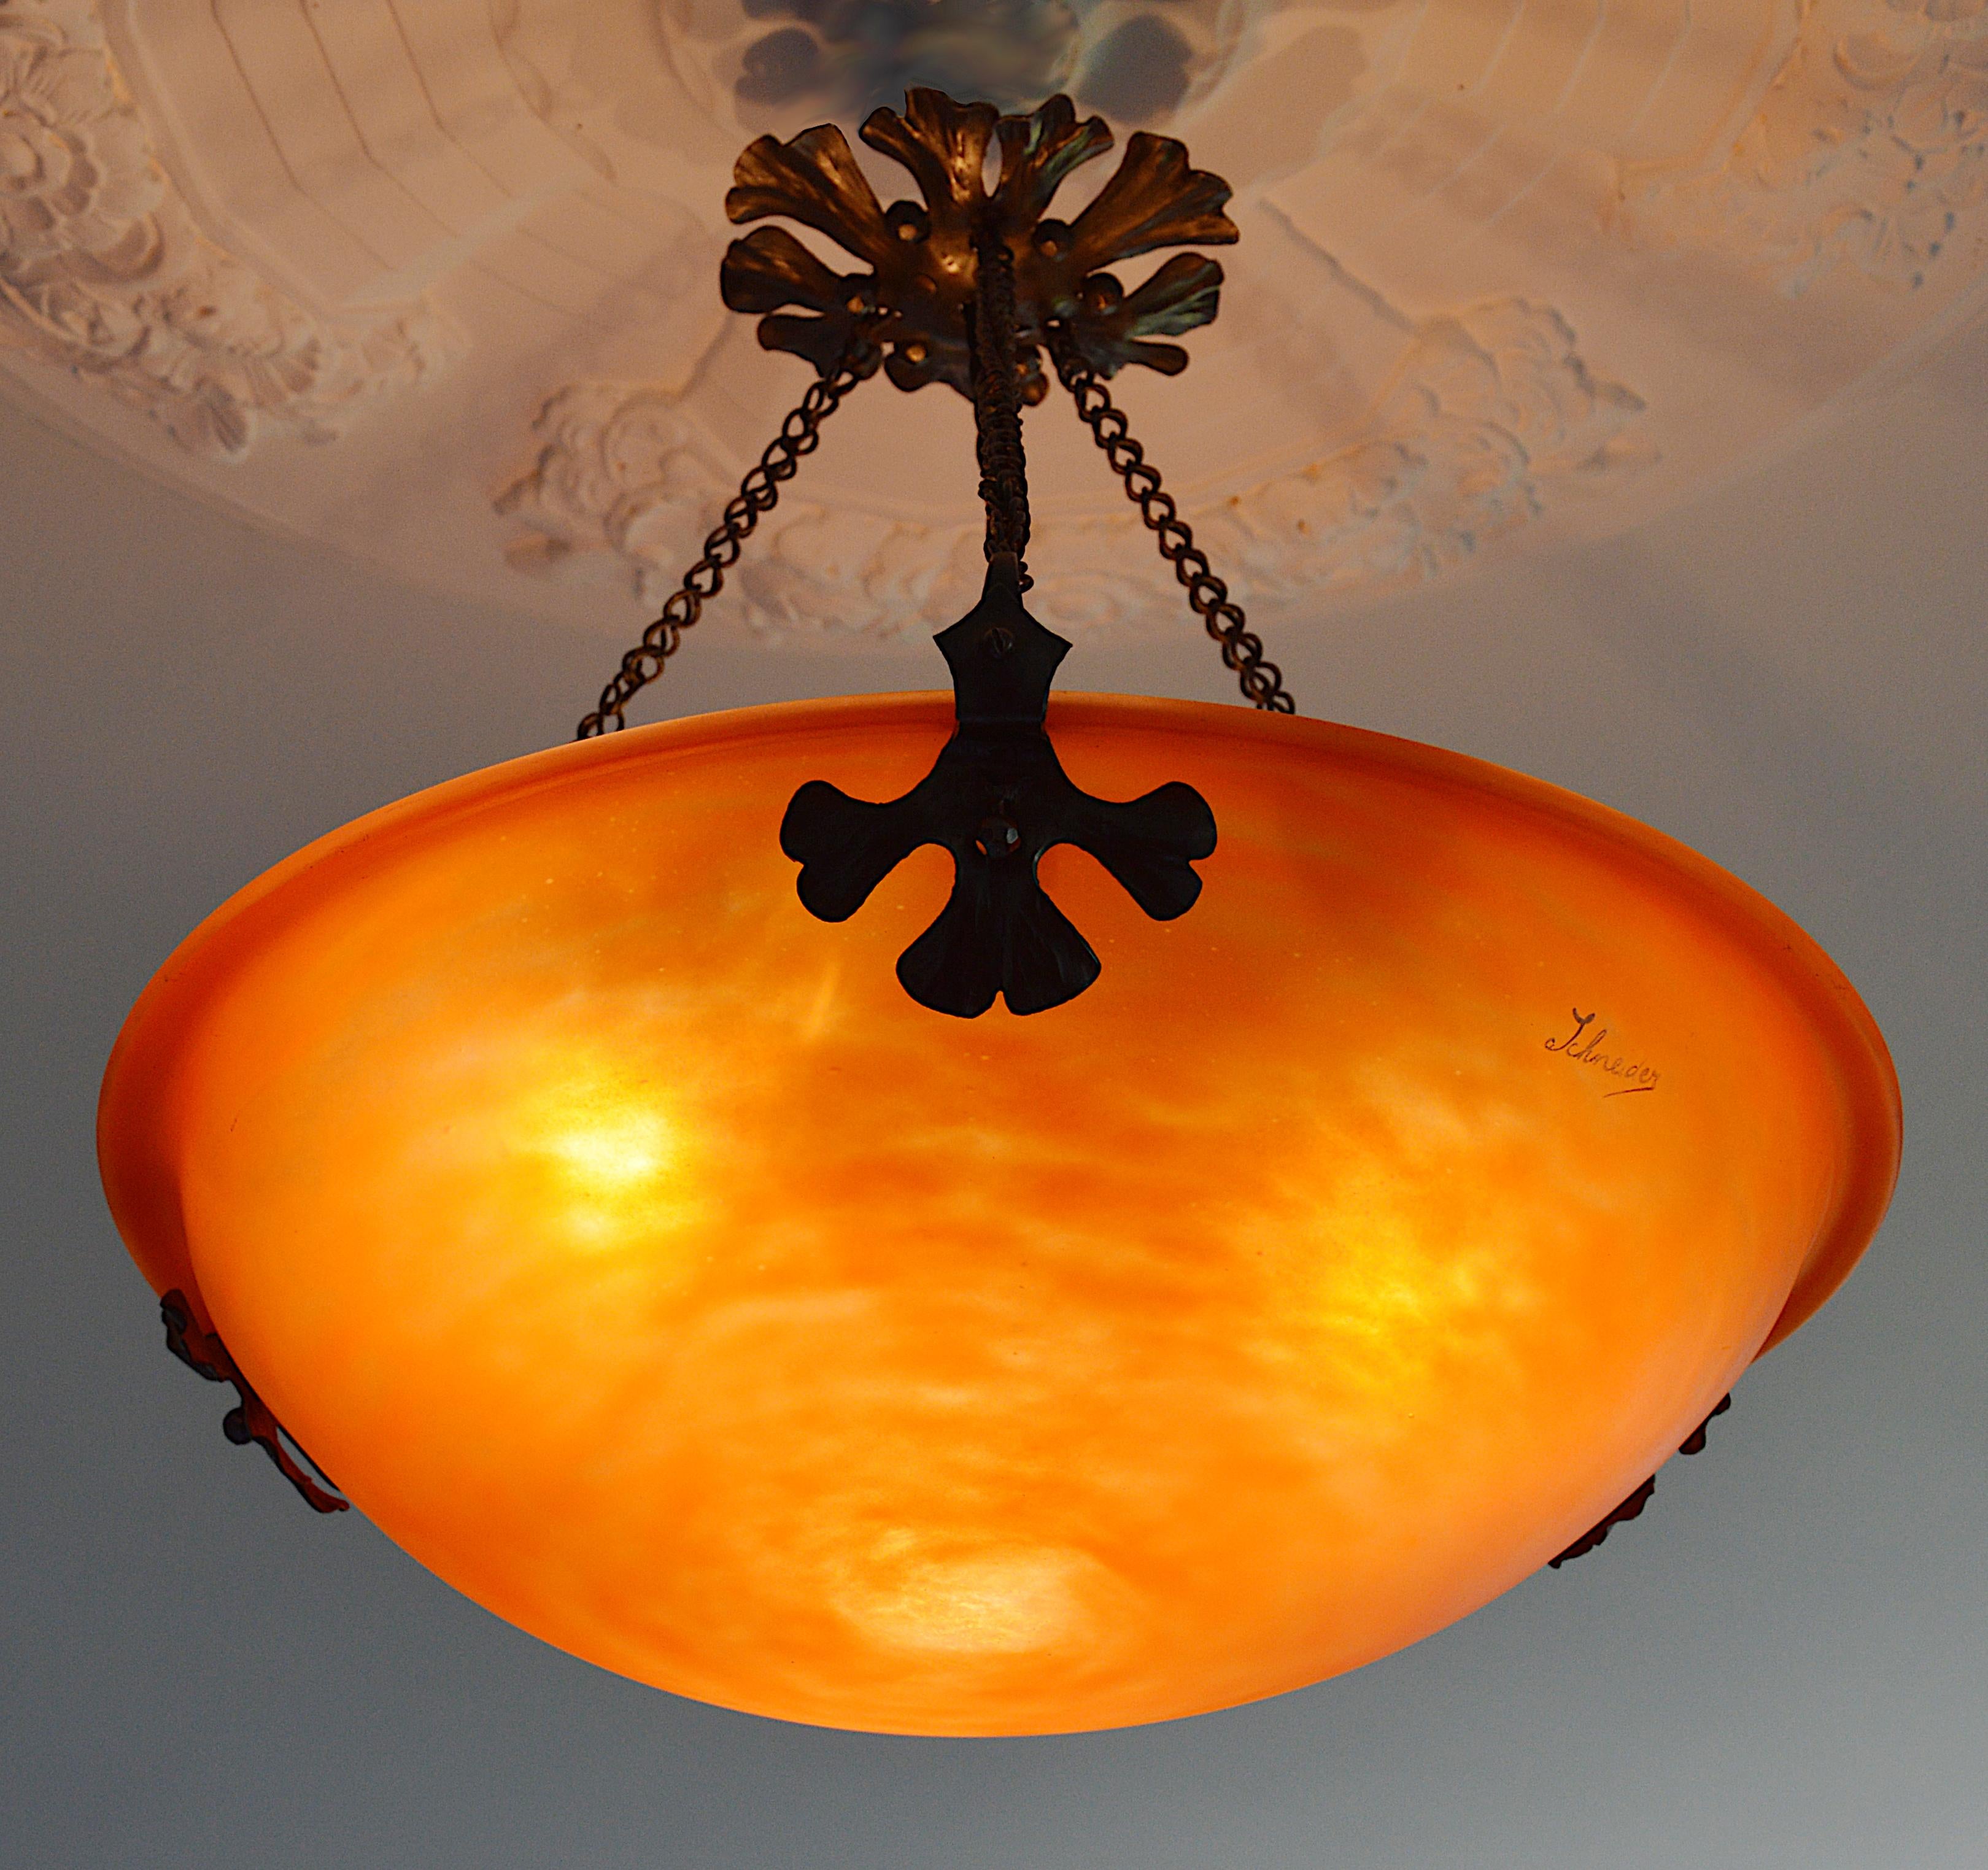 Large French Art Deco chandelier by Charles Schneider, Epinay-sur-Seine (Paris), early 1920s. Mottled glass shade, powders are applied between two layers that comes hung at its original wrought iron fixture by Schneider. Same period as Daum, Muller